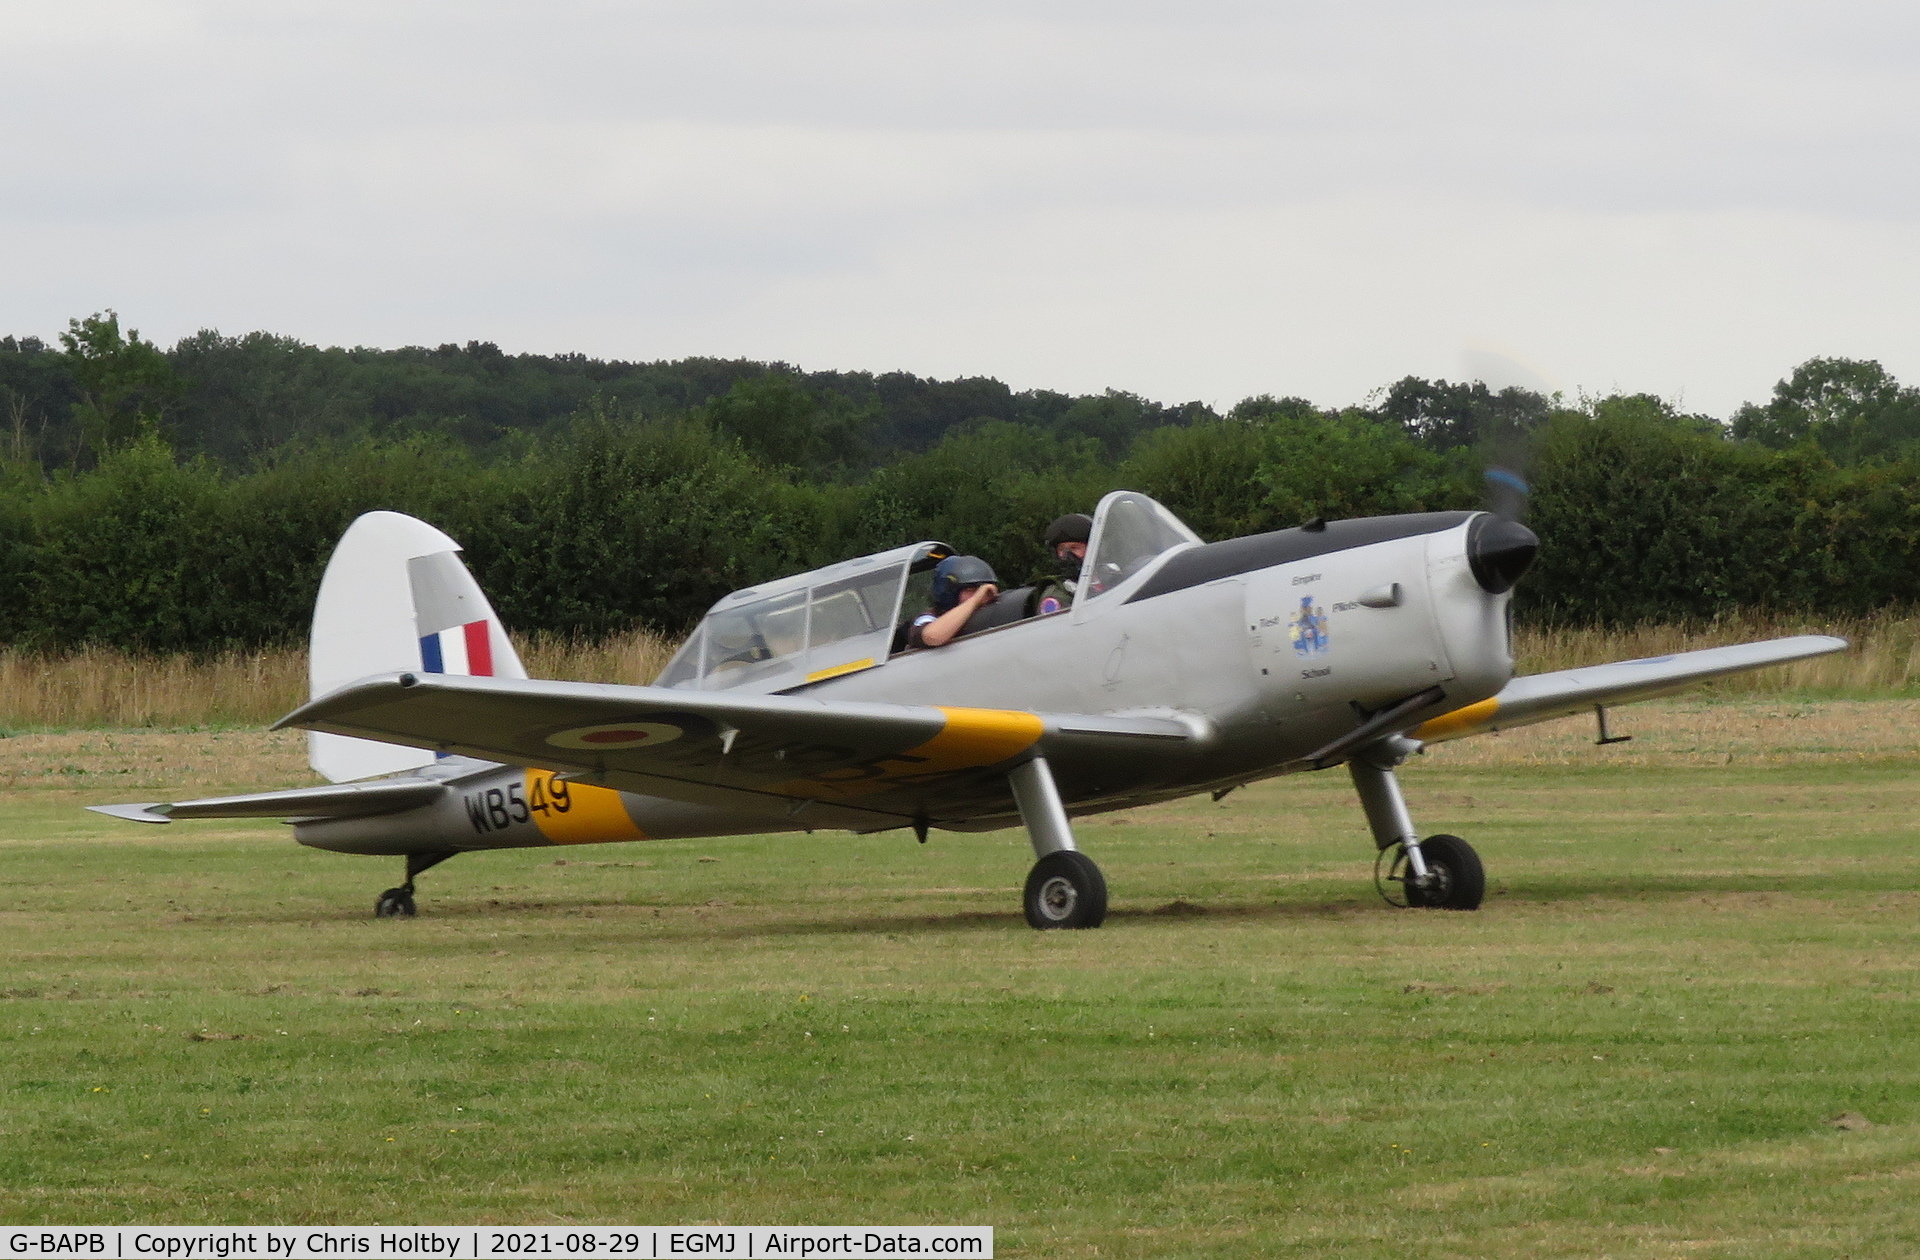 G-BAPB, 1949 De Havilland DHC-1 Chipmunk 22A C/N C1/0001, Arriving at the Little Gransden Airshow 2021 to lead the Red Sparrows display team